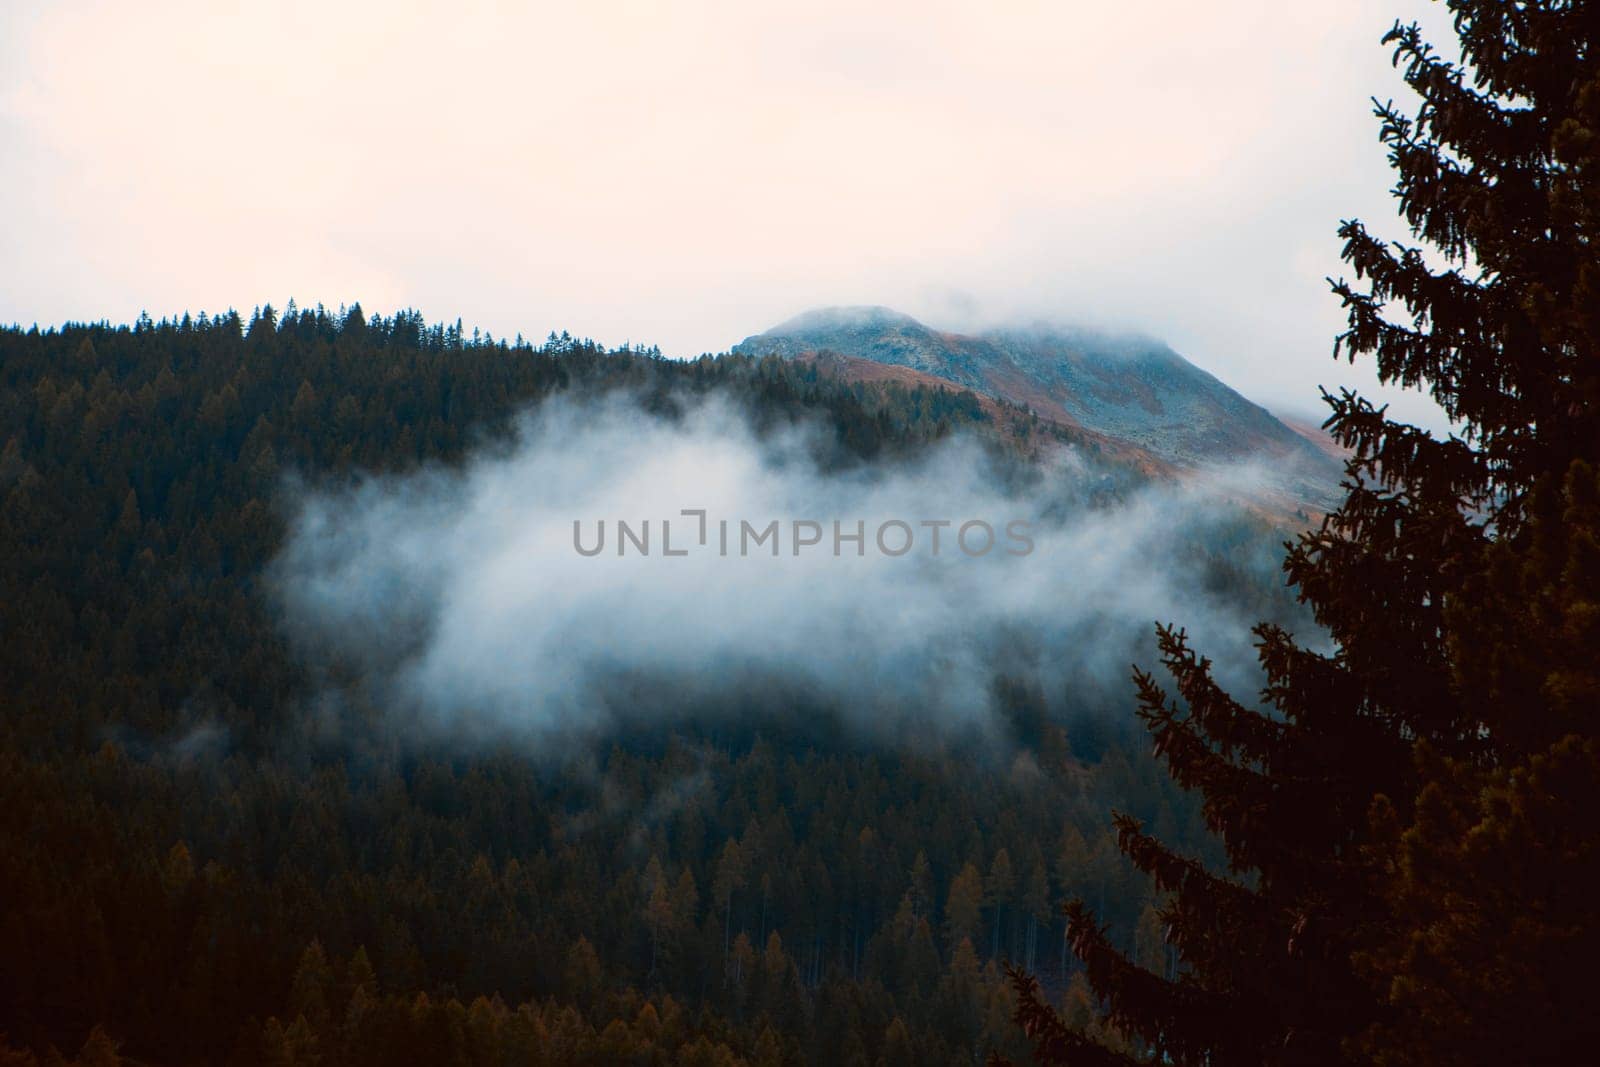 Veiled in Mist: Dawn's Light Reveals a Mountain's Splendor Beyond the Whispering Pines. High quality photo